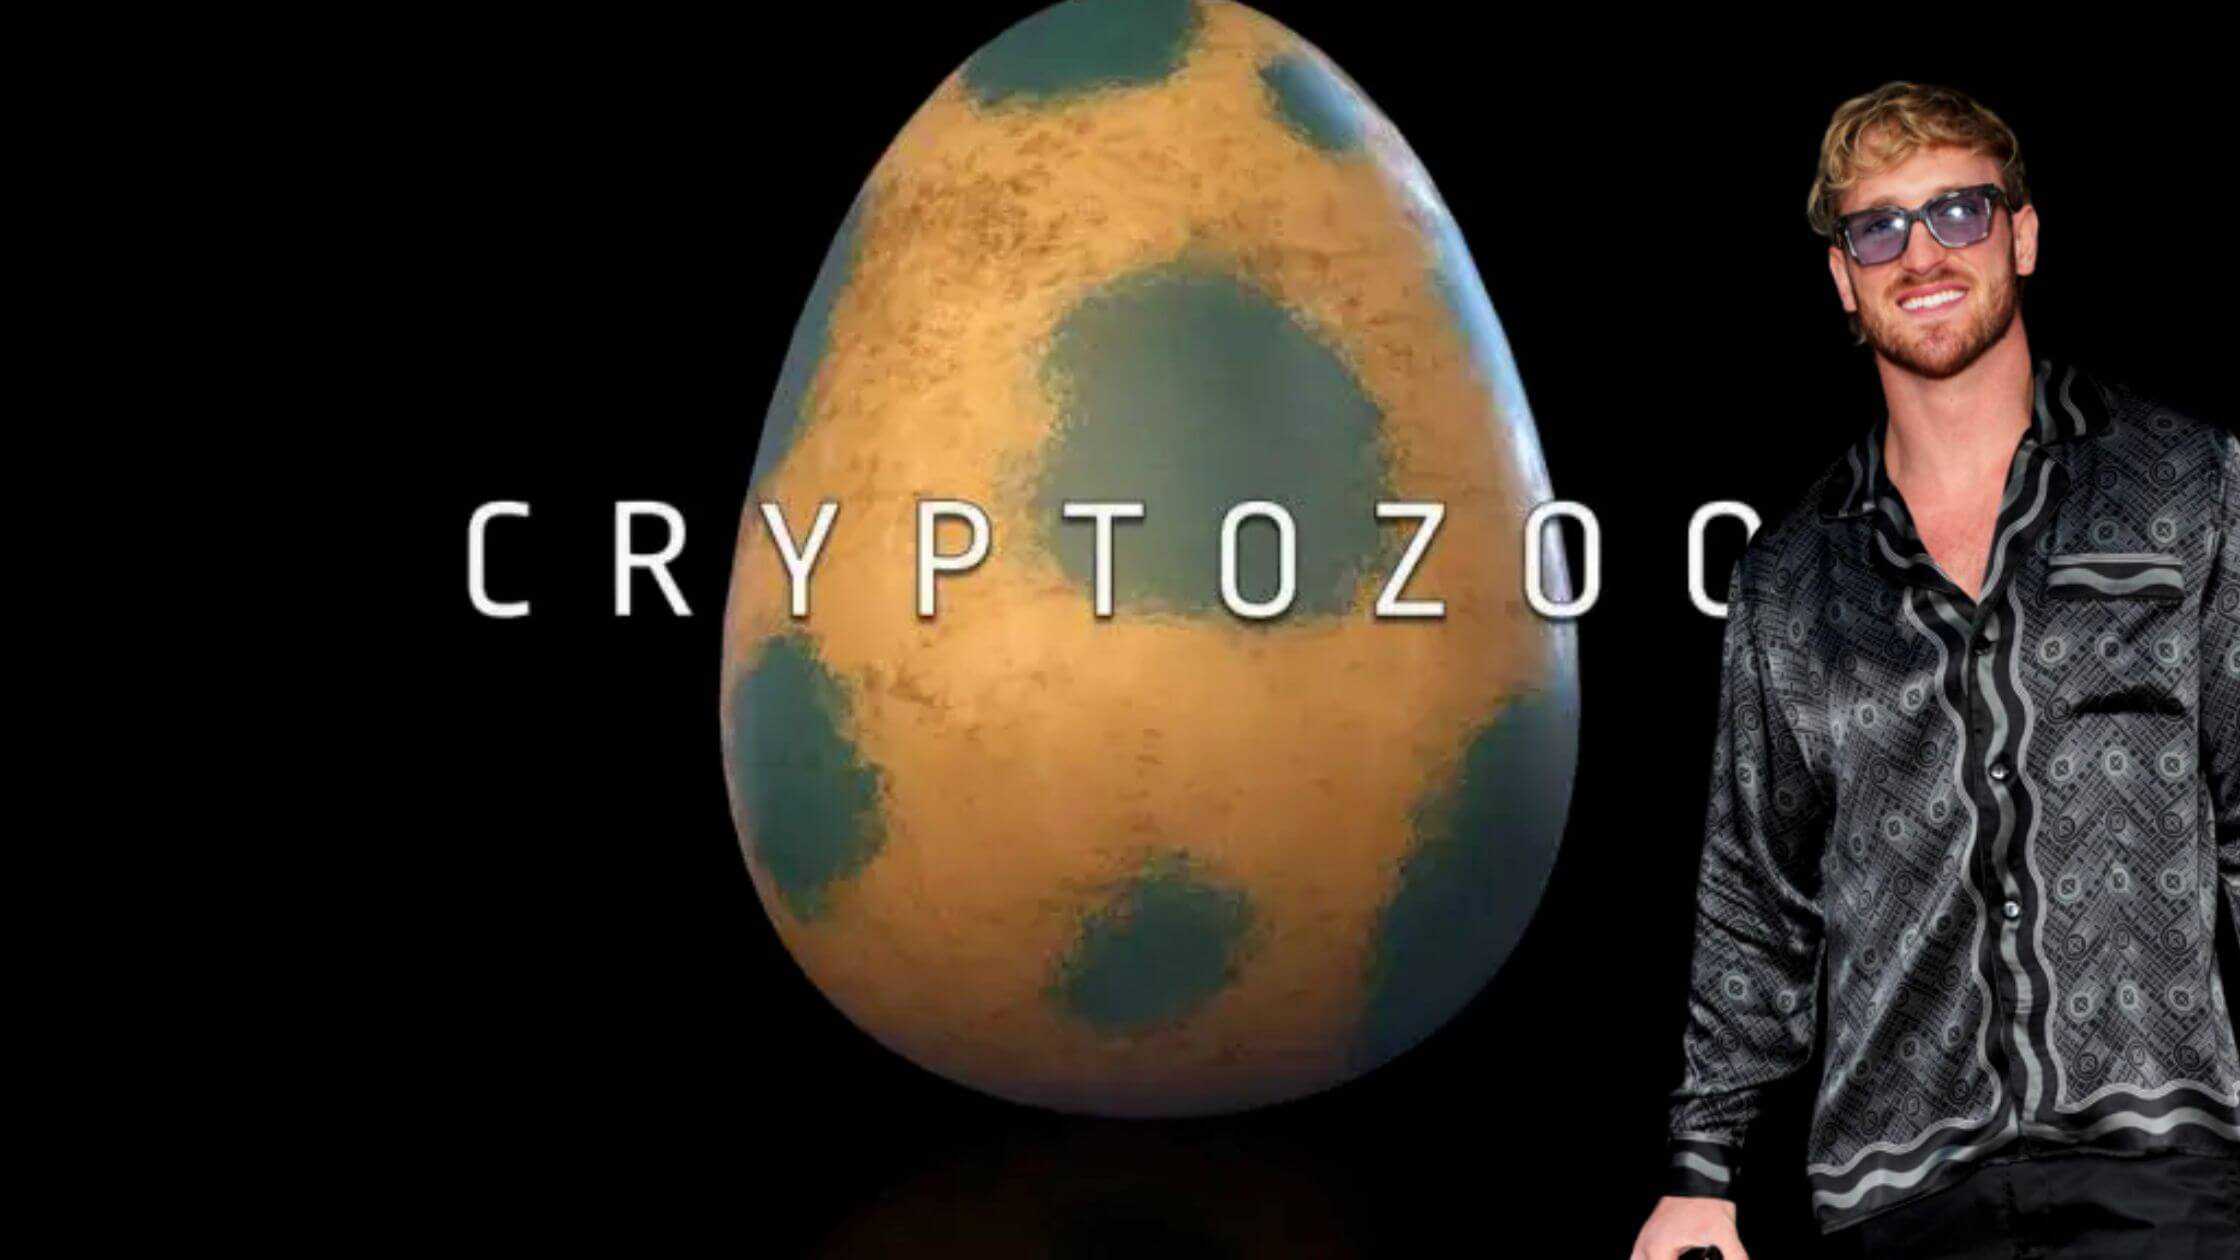 Coffeezilla Discloses Cryptozoo Play-To-Earn Scam That Lost Millions